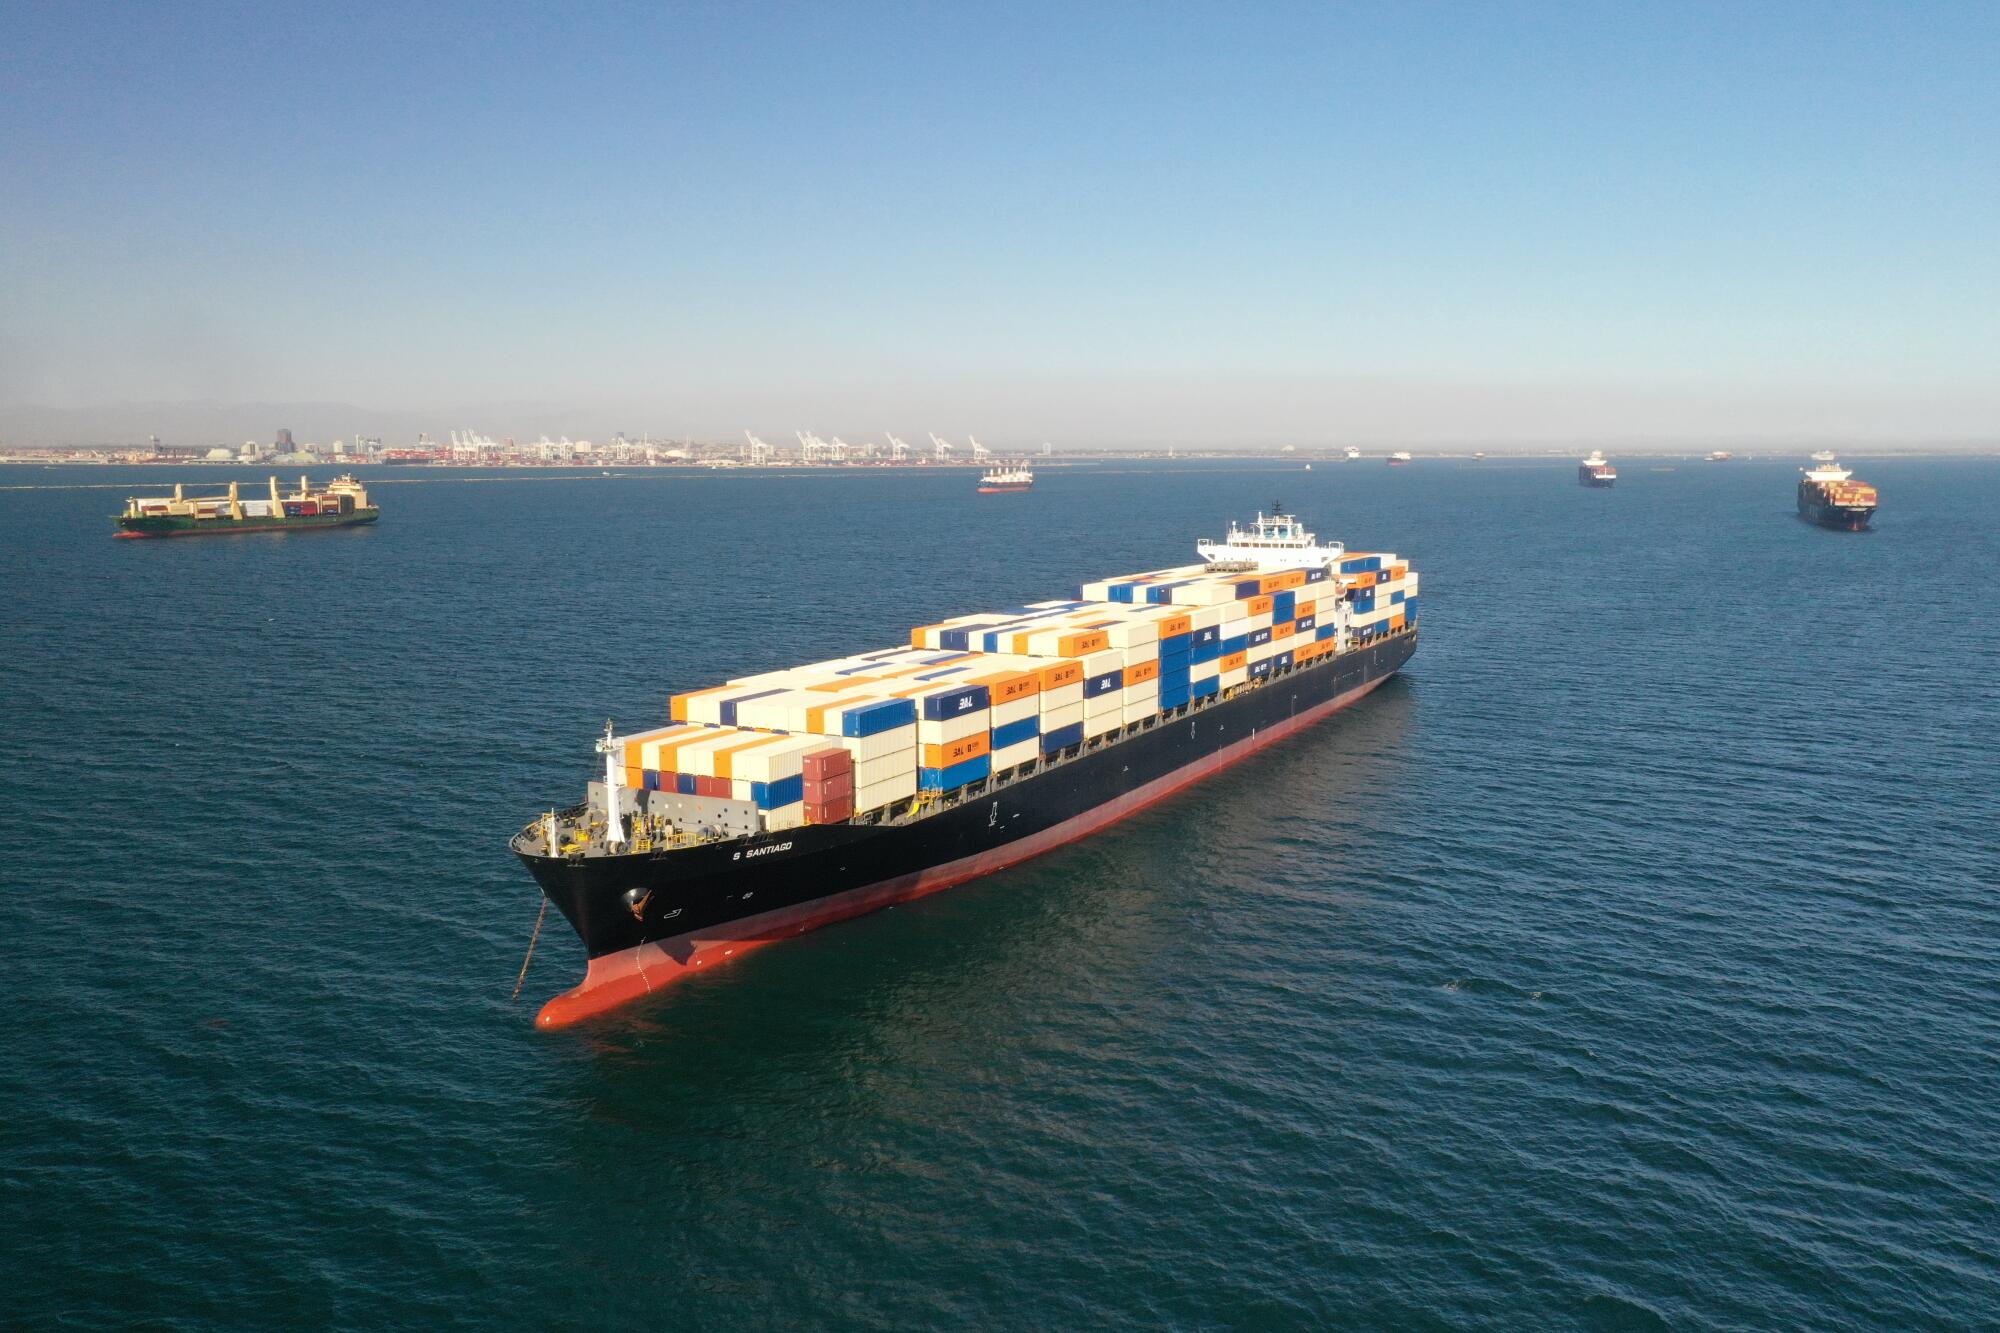 A cargo ship laden with containers sits at sea. In the distance are other vessels.